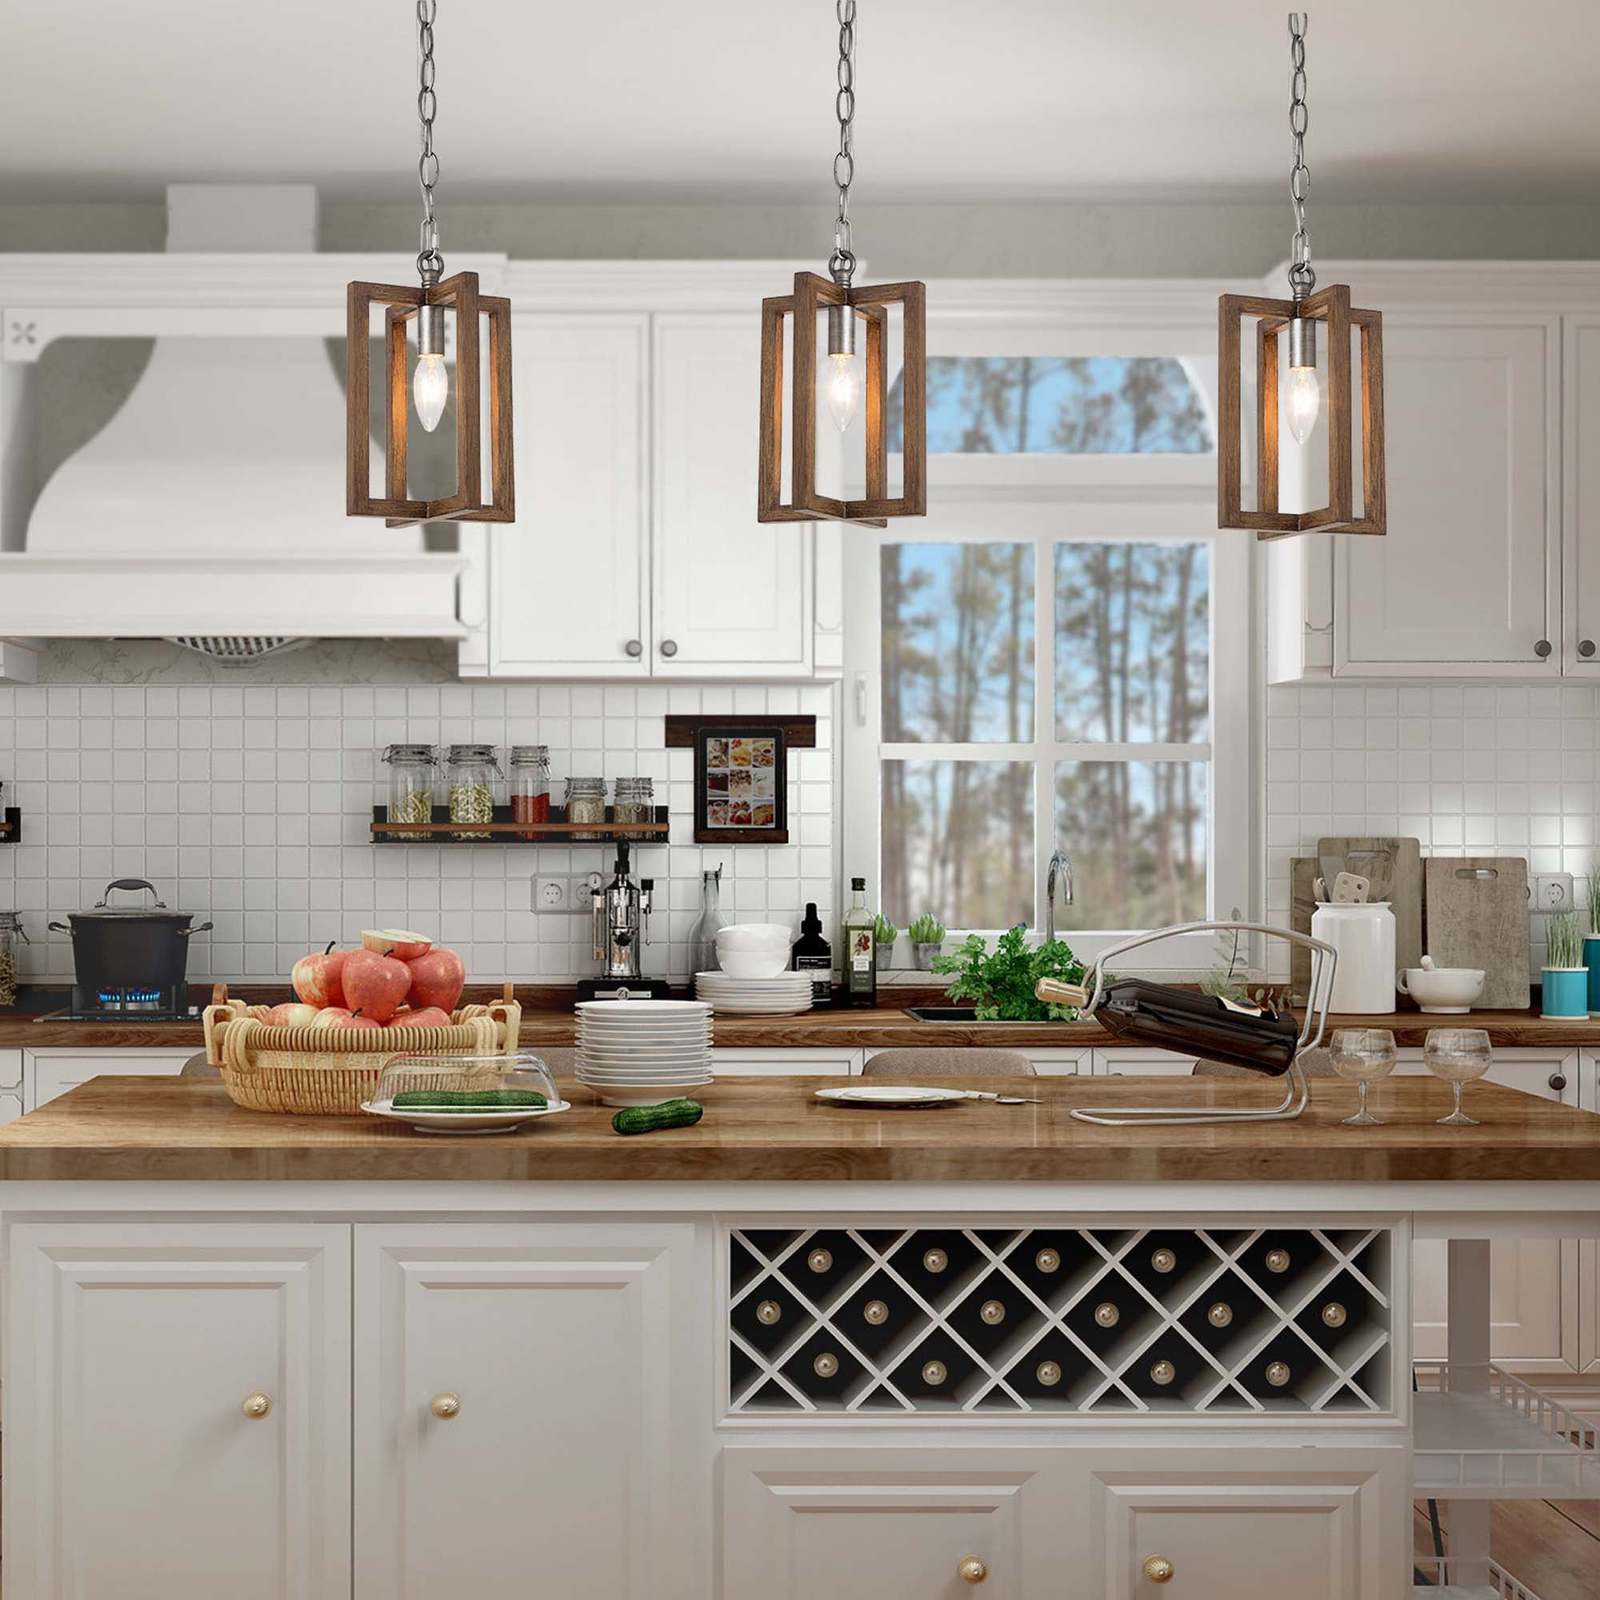 18 Kitchen Island Lighting Ideas for Every Style